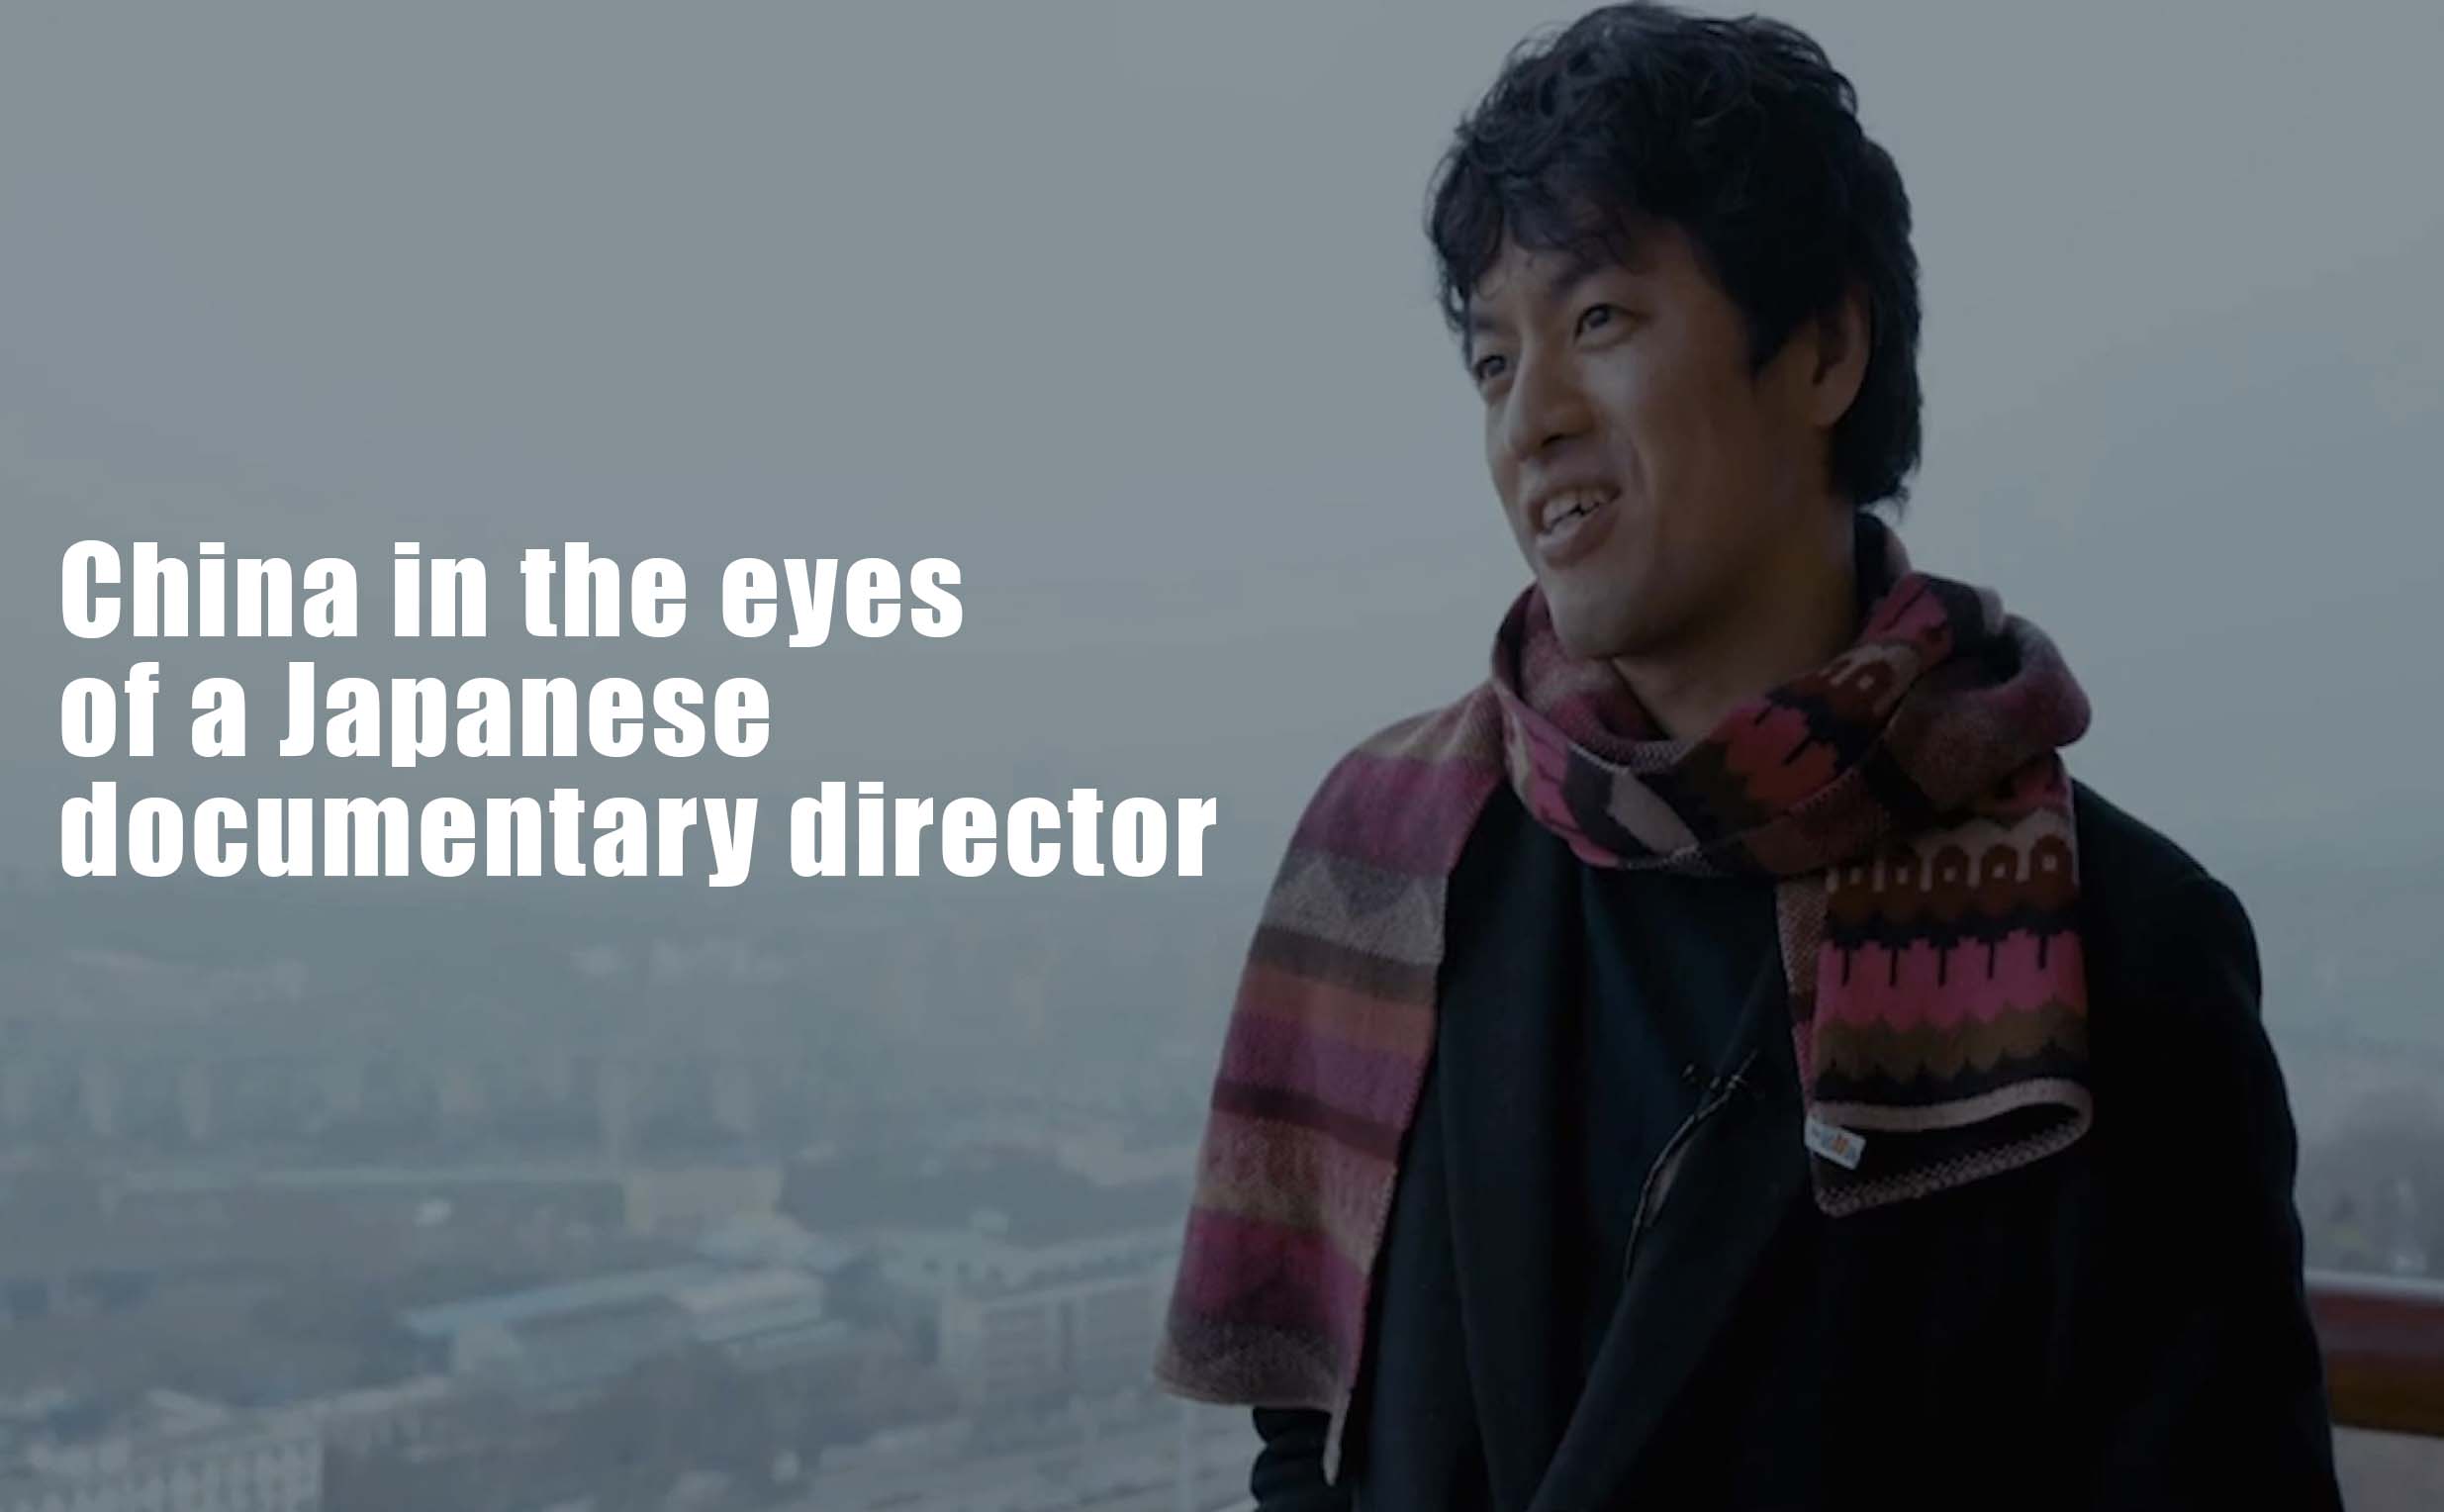 China in the eyes of a Japanese documentary director